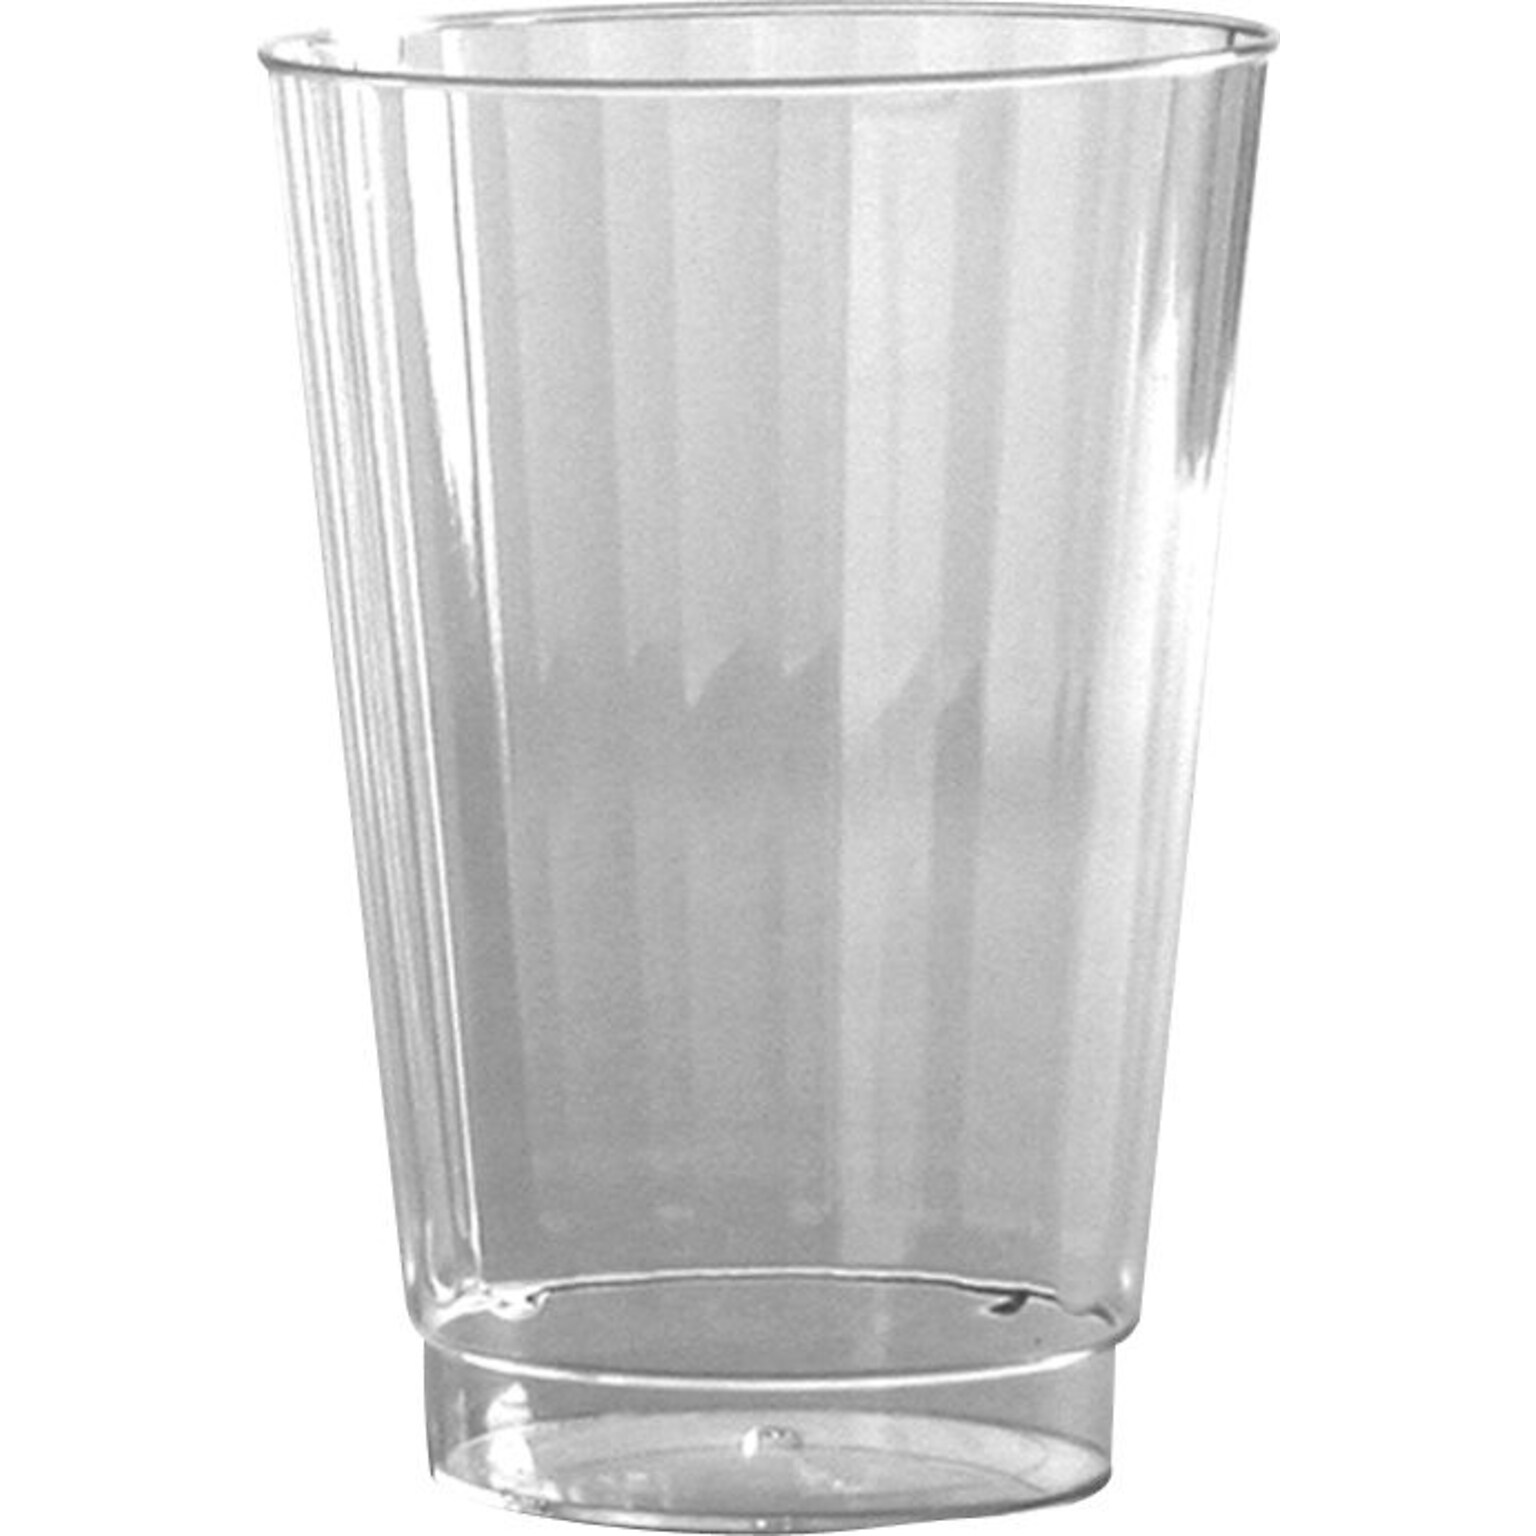 WNA Classic Crystal Plastic Cold Fluted Tumbler, 12 oz., Clear, 20 Cups/Pack, 12 Packs/Carton (WNACC12240)